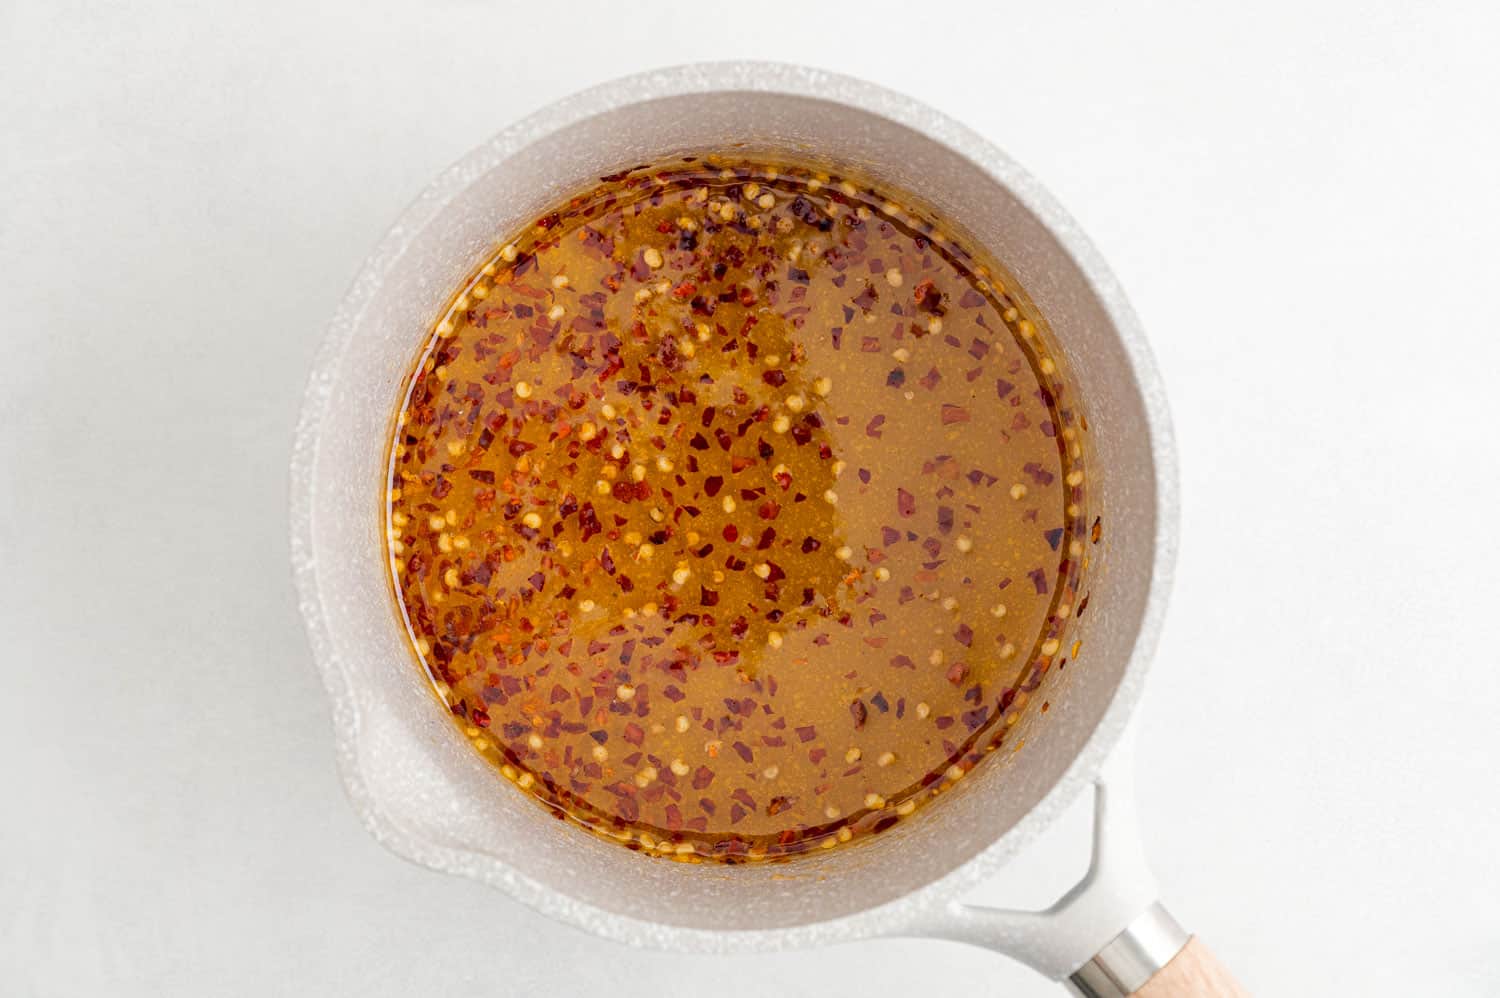 Honey with red pepper flakes in a saucepan.